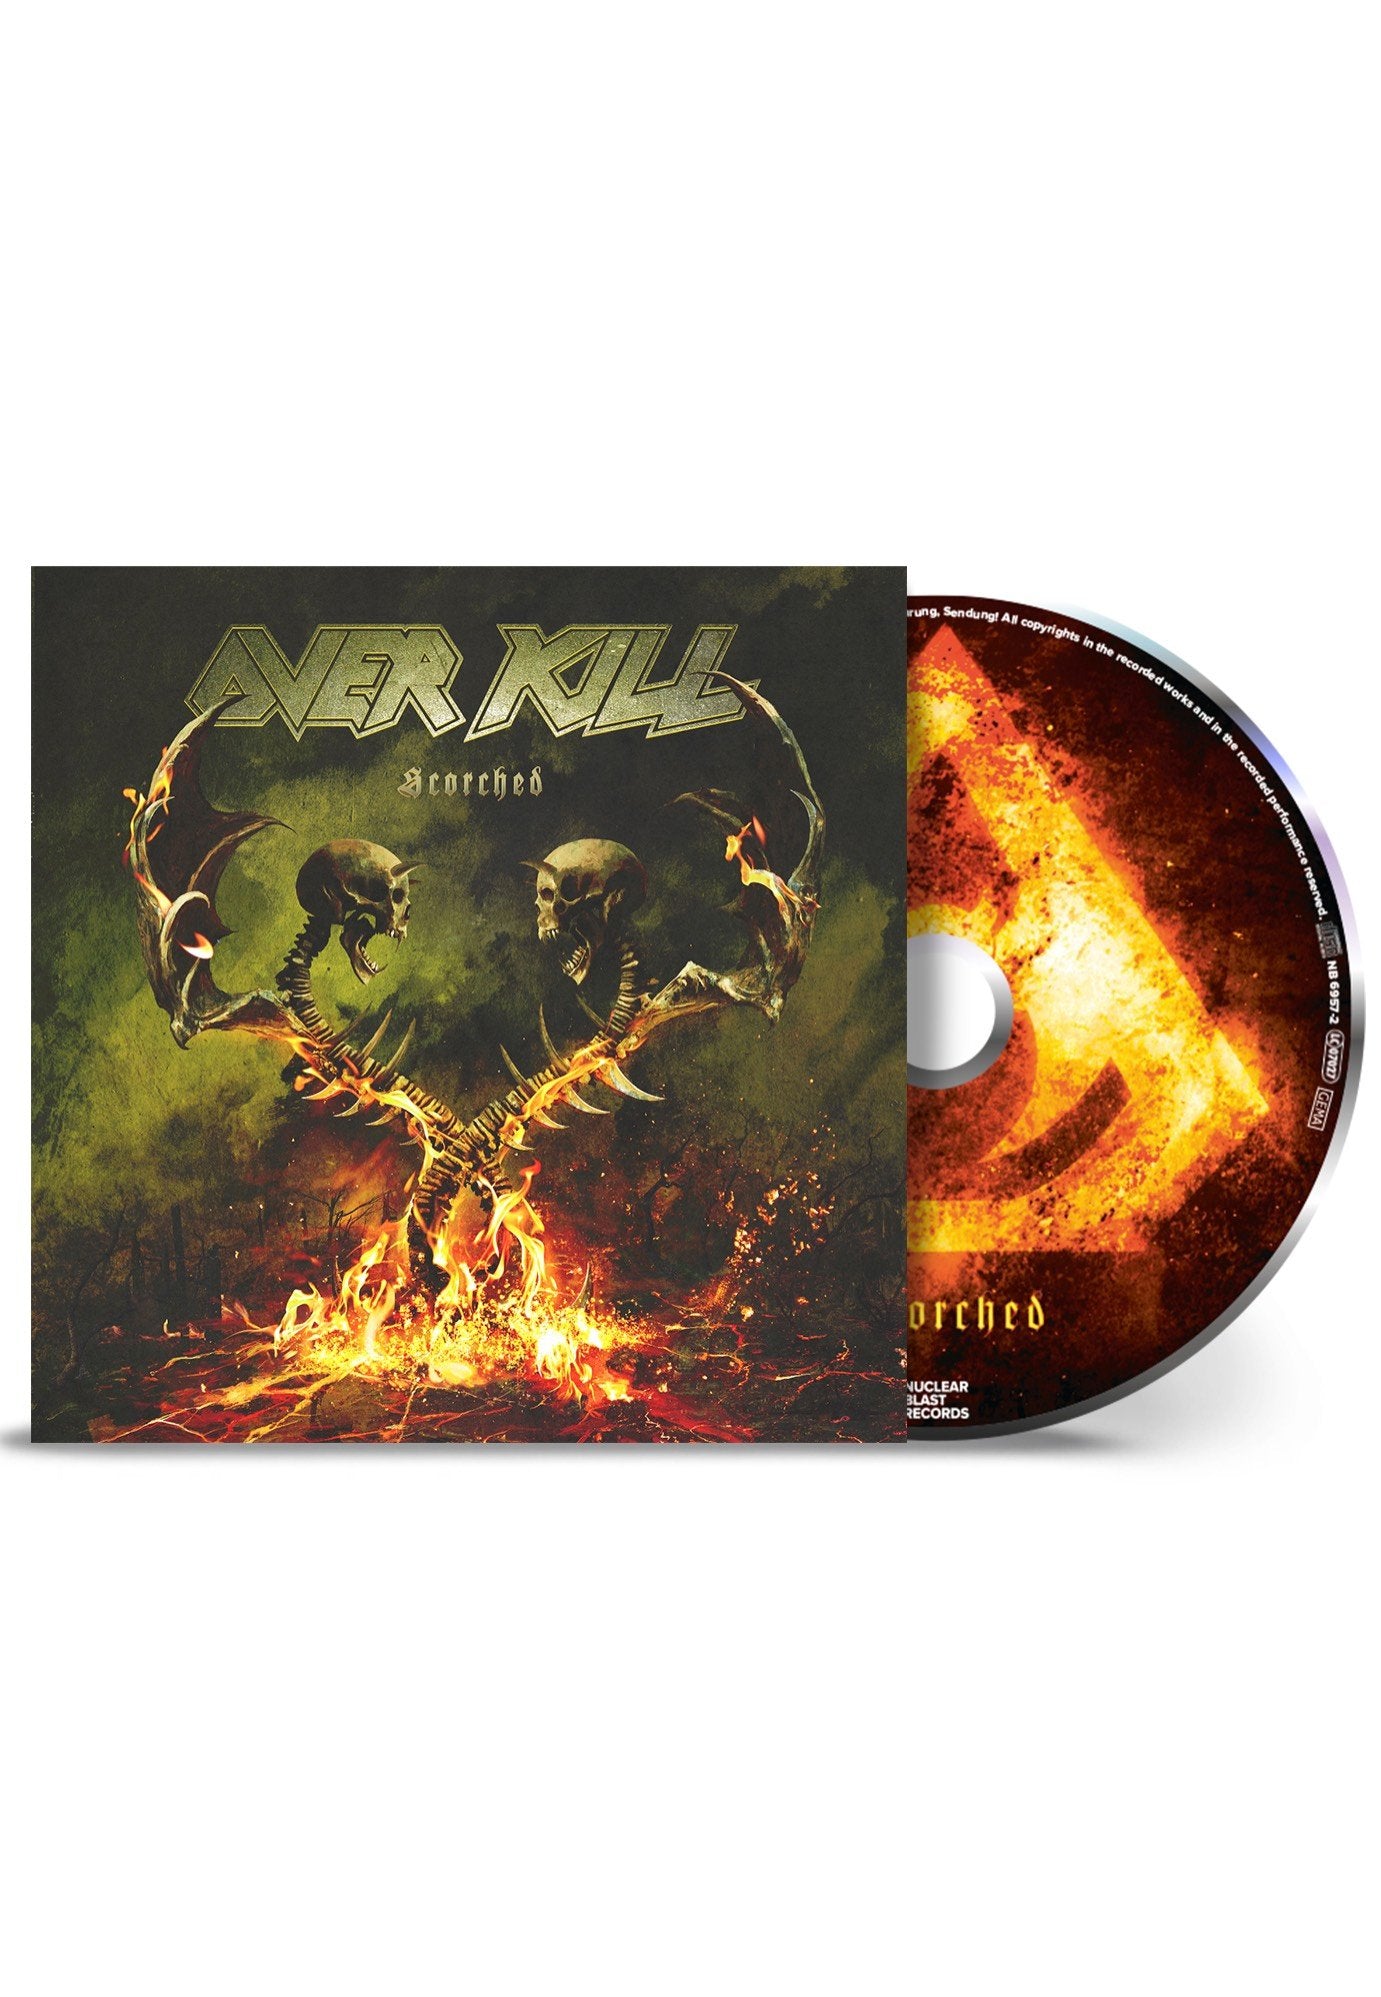 Overkill - Scorched - CD